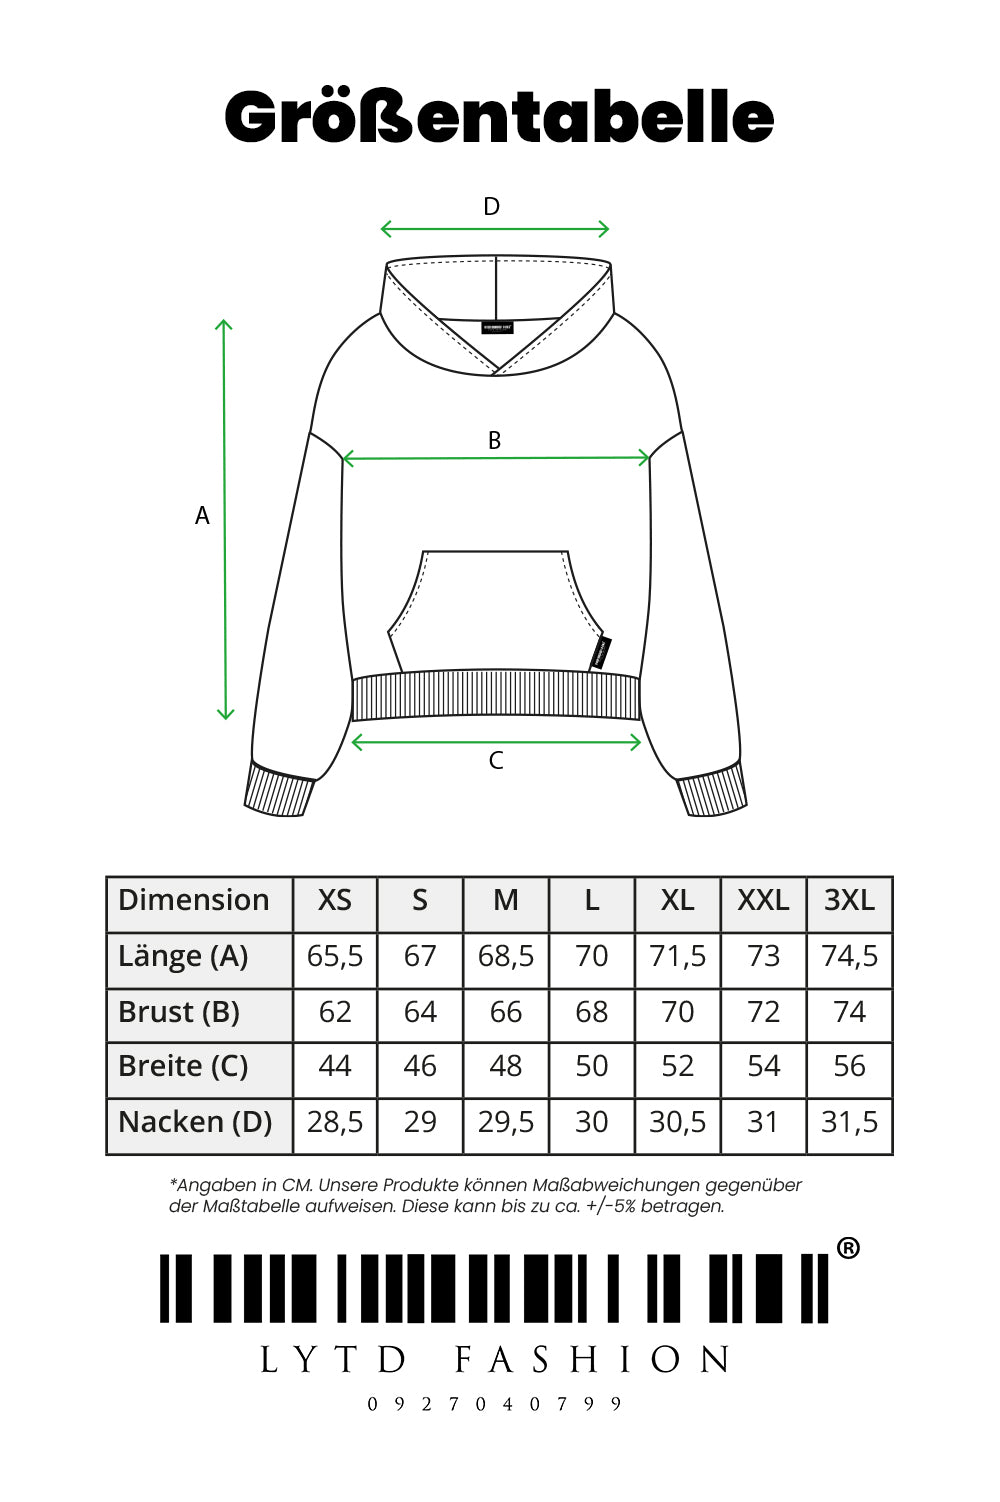 AUG Greven AK Organic Extra Heavy Oversized Dropshoulder Hoodie (Portugal)